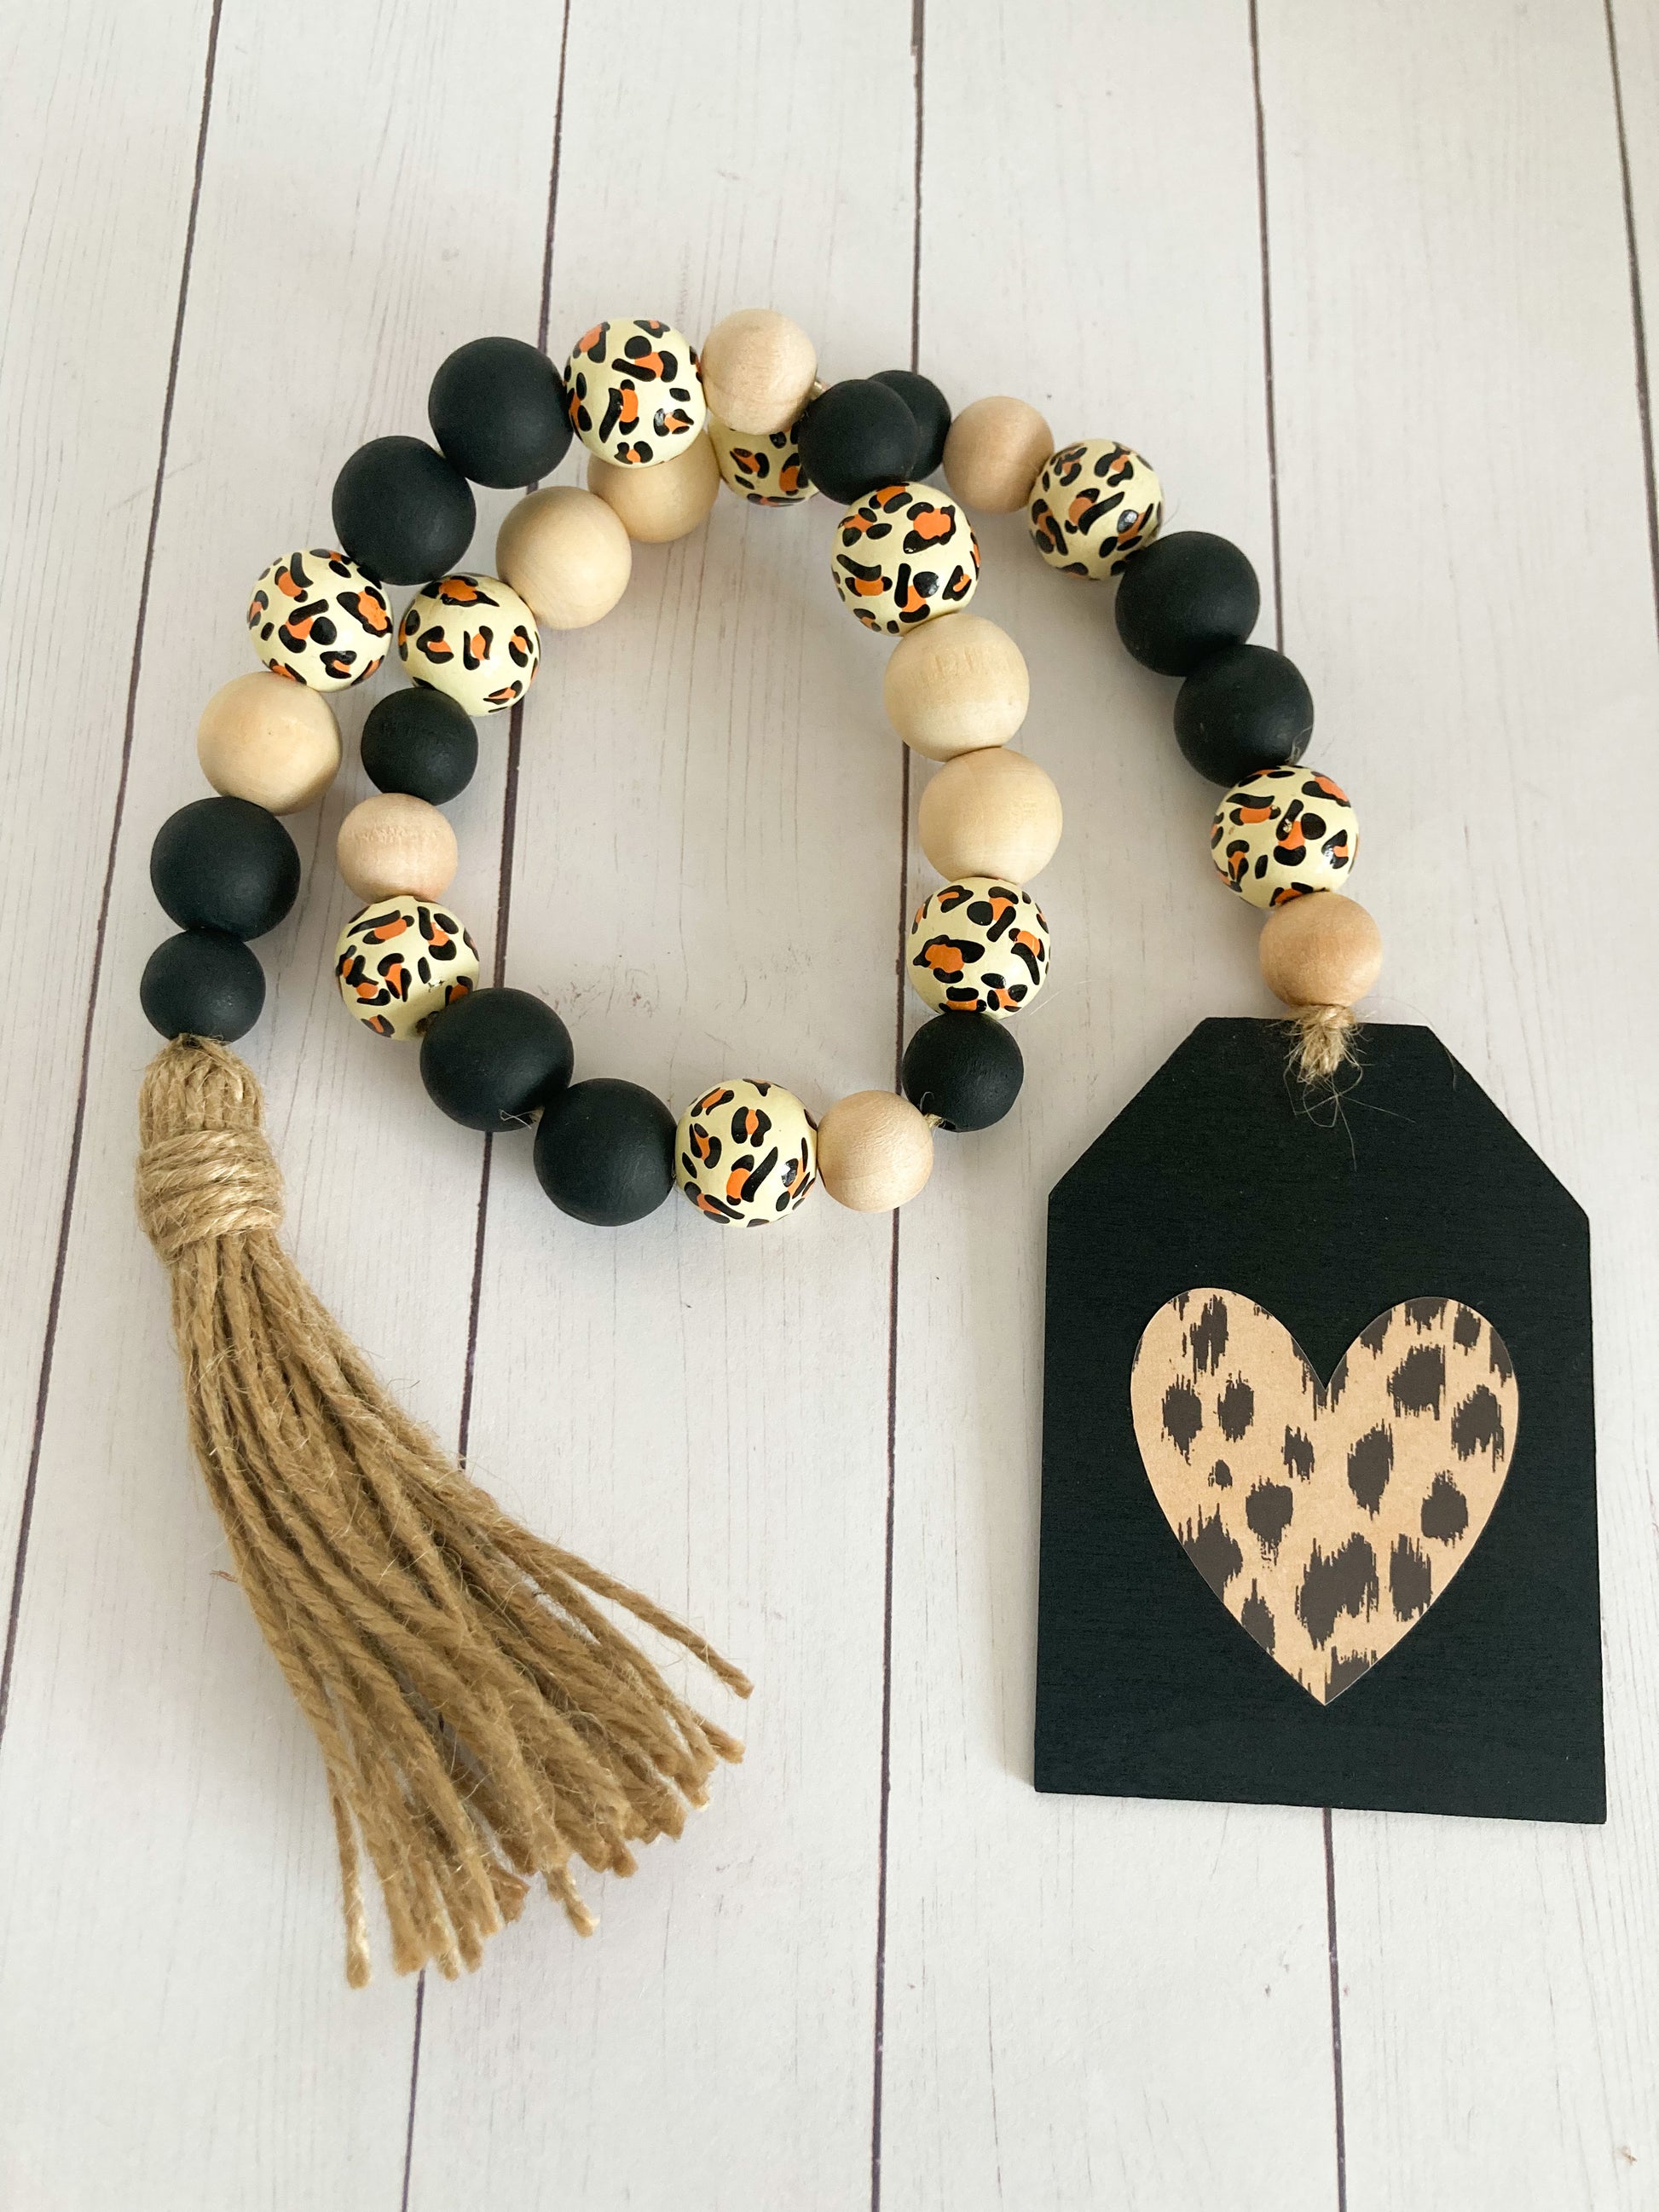 Leopard print wood bead garland with a variety of black natural and leopard printed beads jute twine tassel and black painted tag with leopard print heart 24 inches in total length